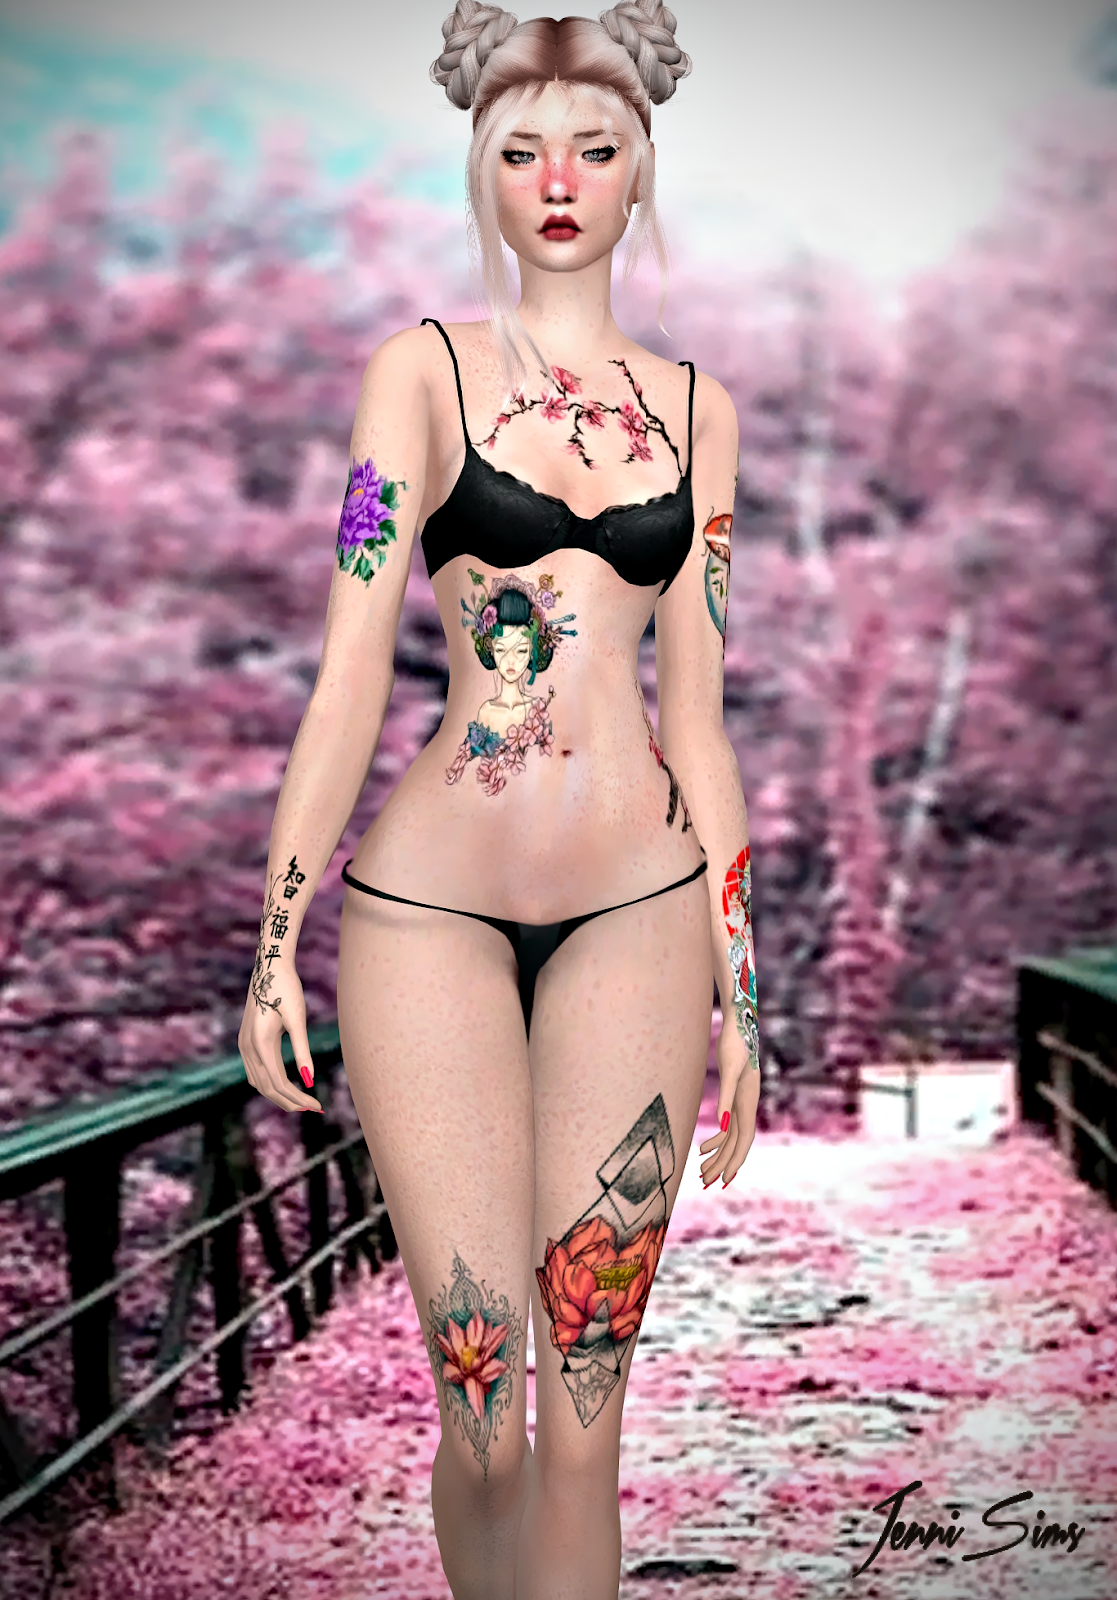 JenniSims: Downloads sims 4:Collection Tattoos Asian,Cyberea